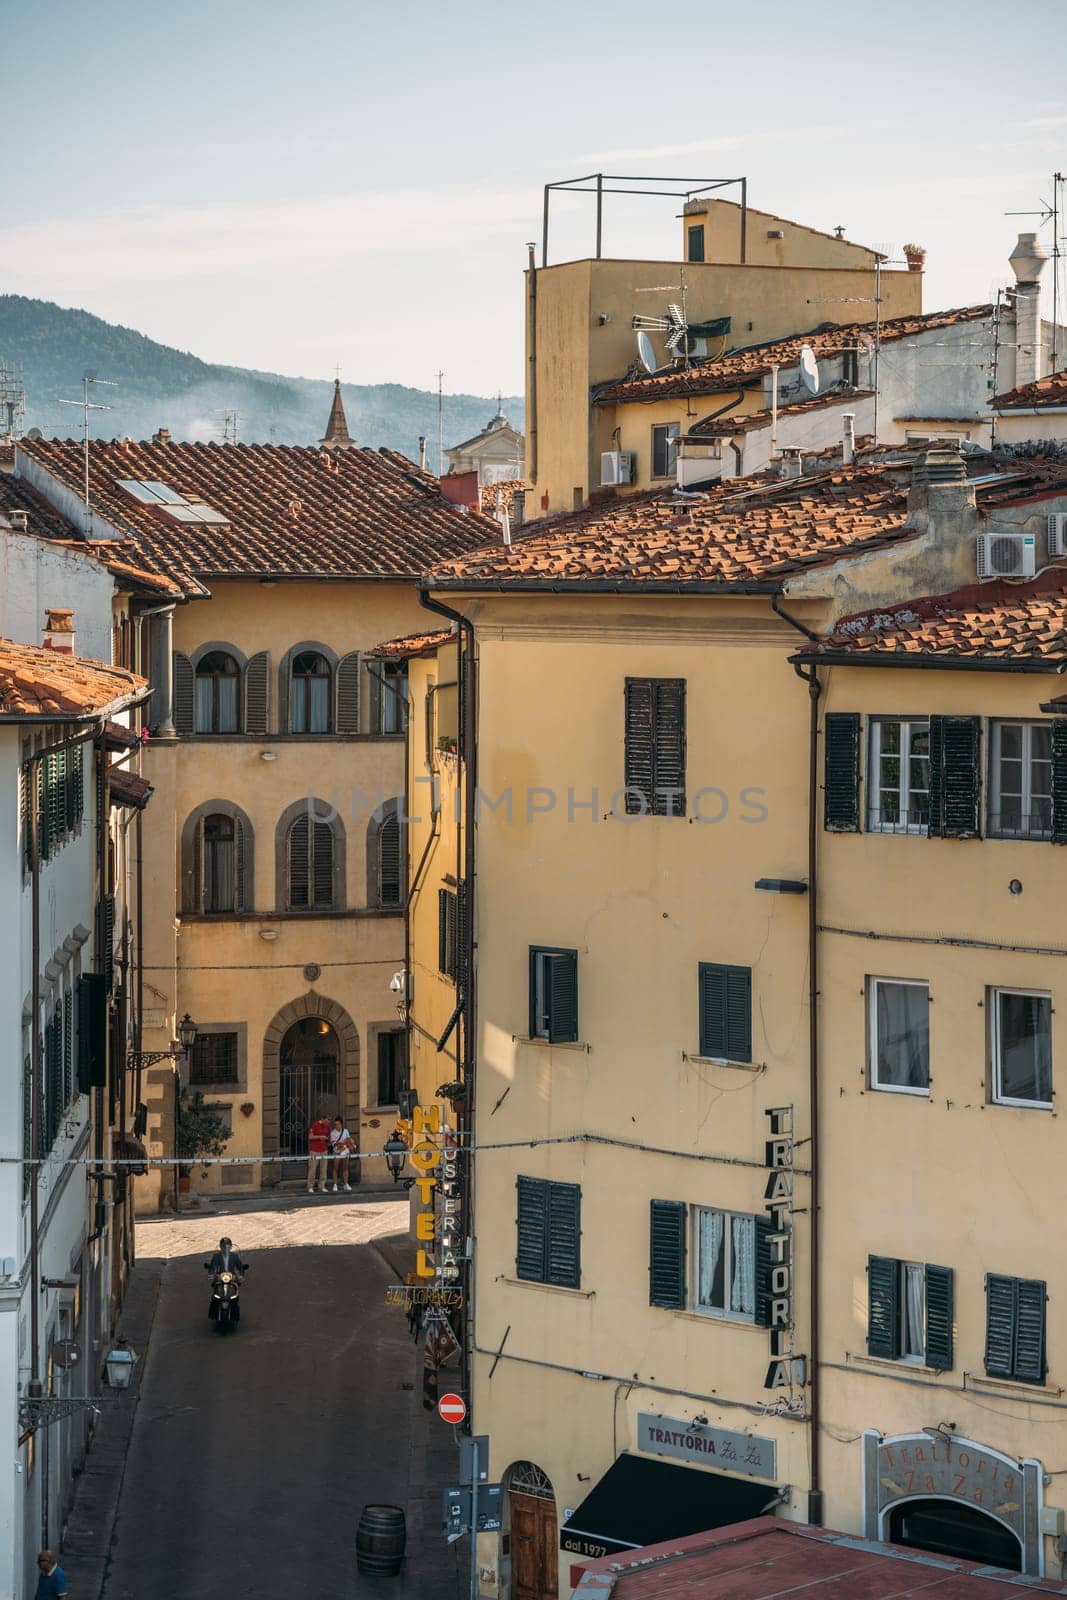 29 SEPTEMBER 2021, FLORENCIA, ITALY: Top view of a beautiful orange colored old tenement house with arches in Florence on a sunny warm summer day. Concept of beautiful old european architecture.